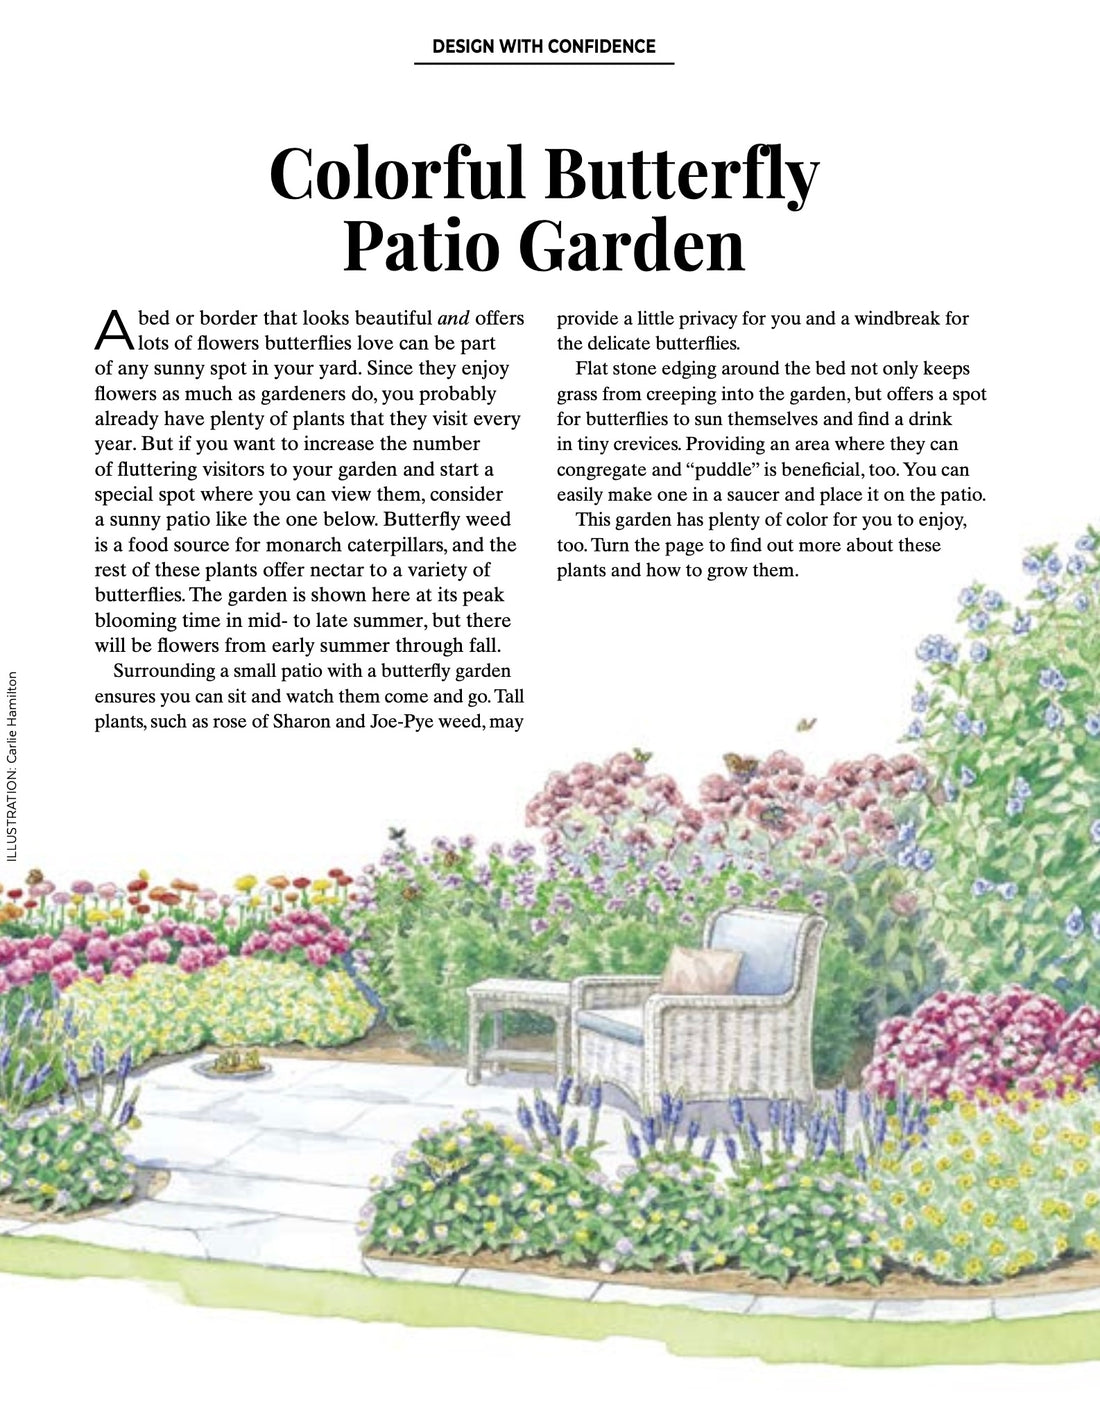 Colorful Butterfly Patio Garden from Eden of Wings, FL